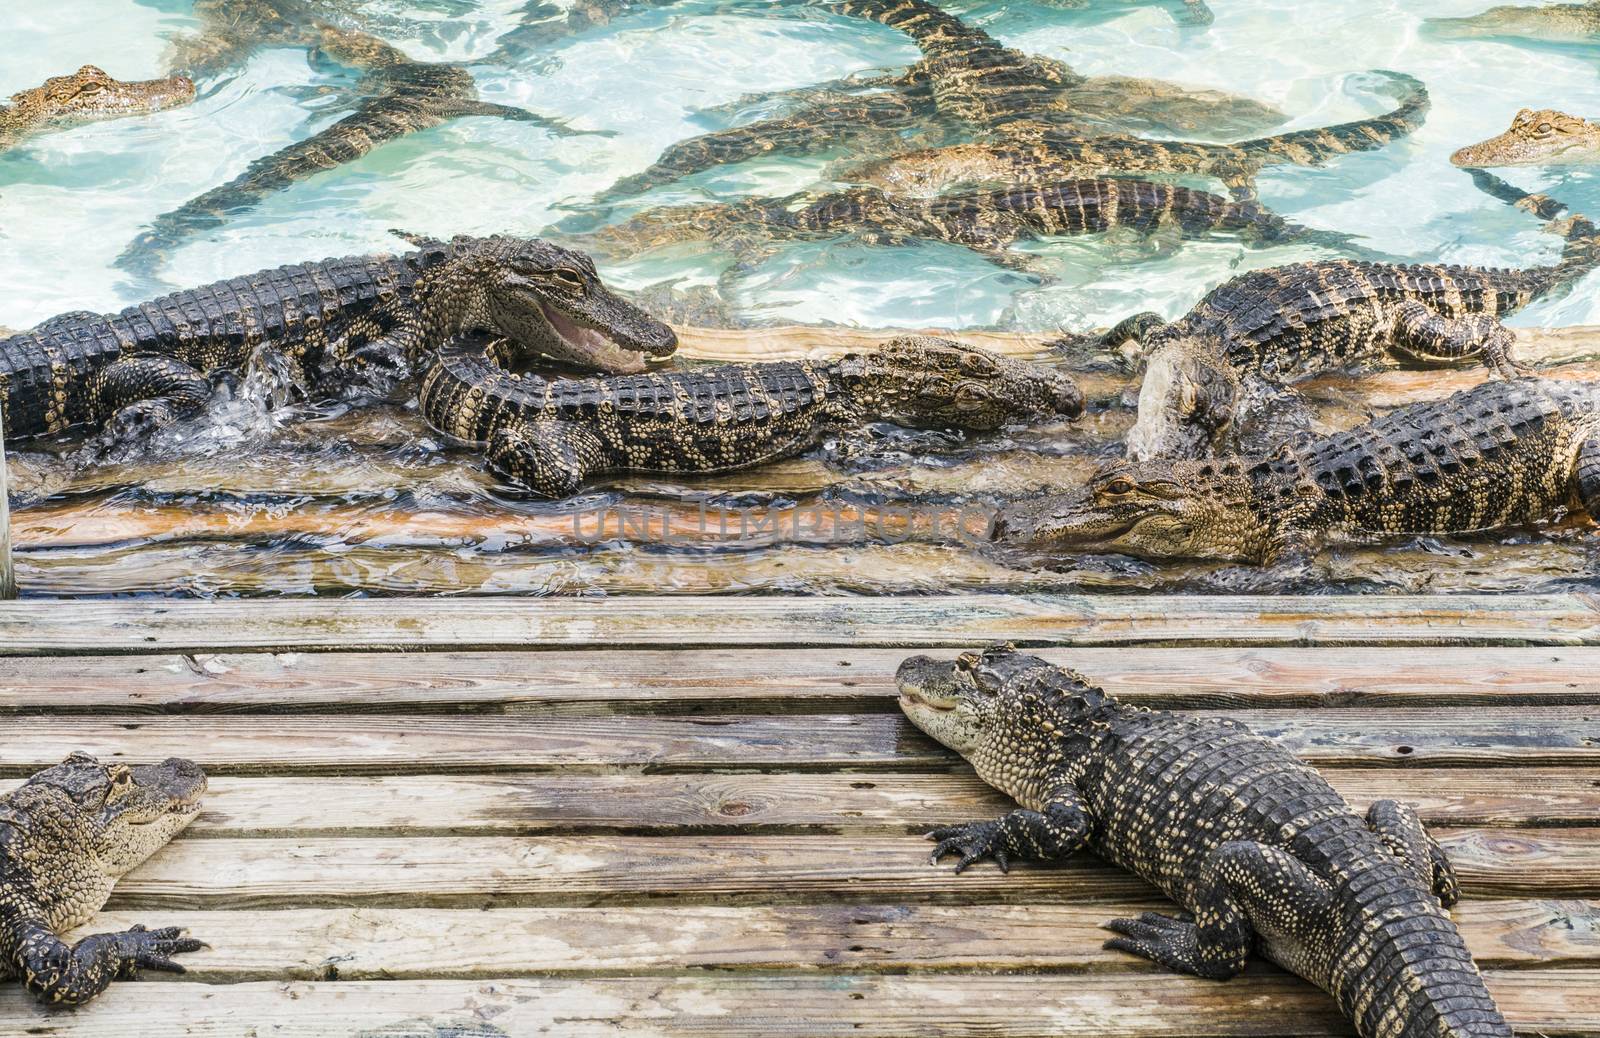 congregation of playful alligators in Florida tourism attraction